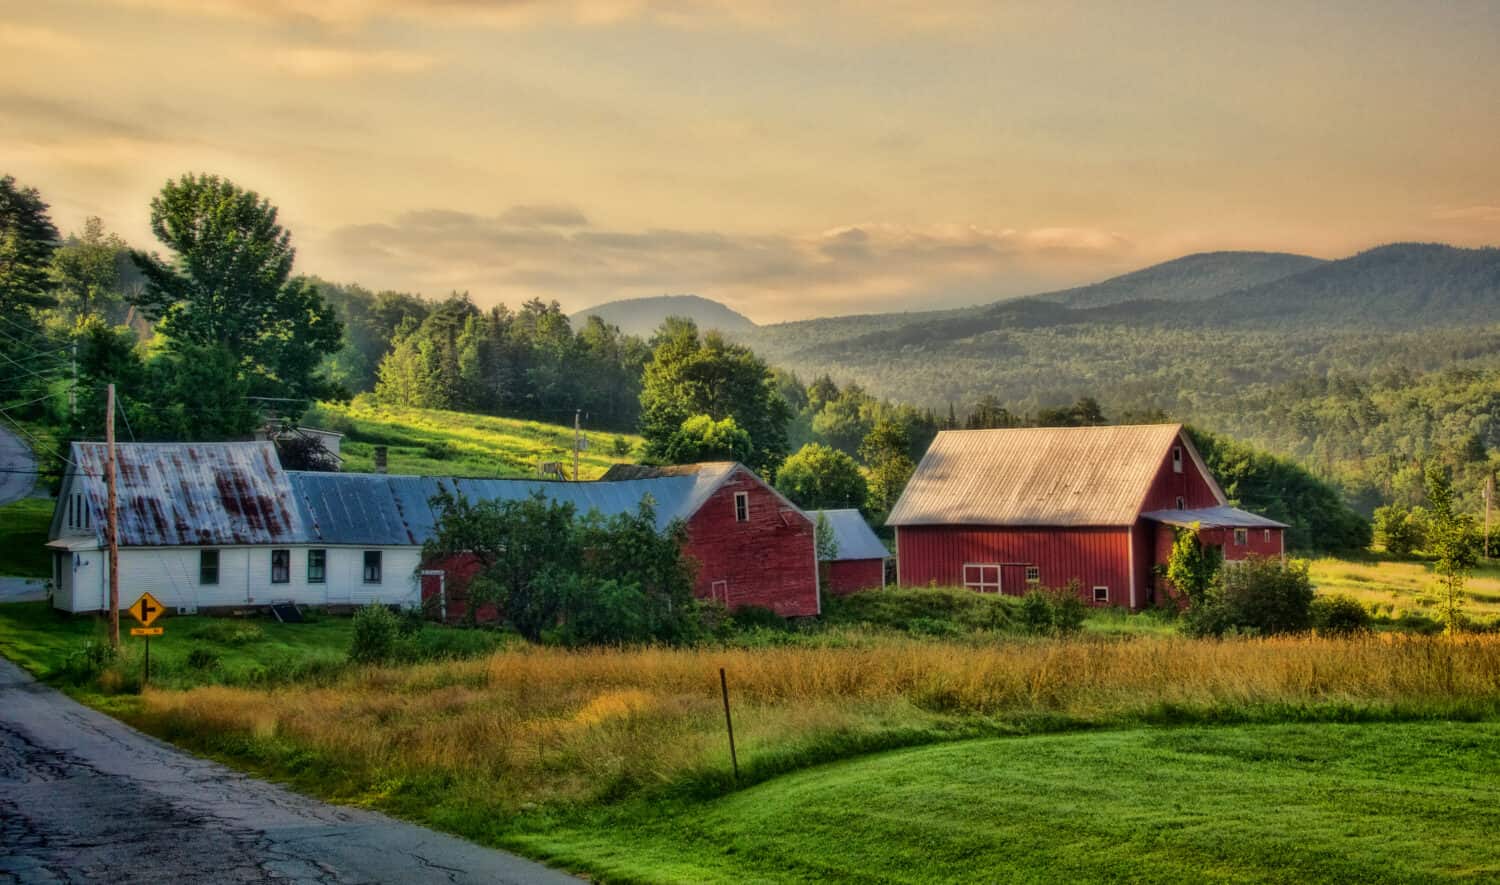 First light of the day slowly warming up the farm early summer morning. Landaff, NH